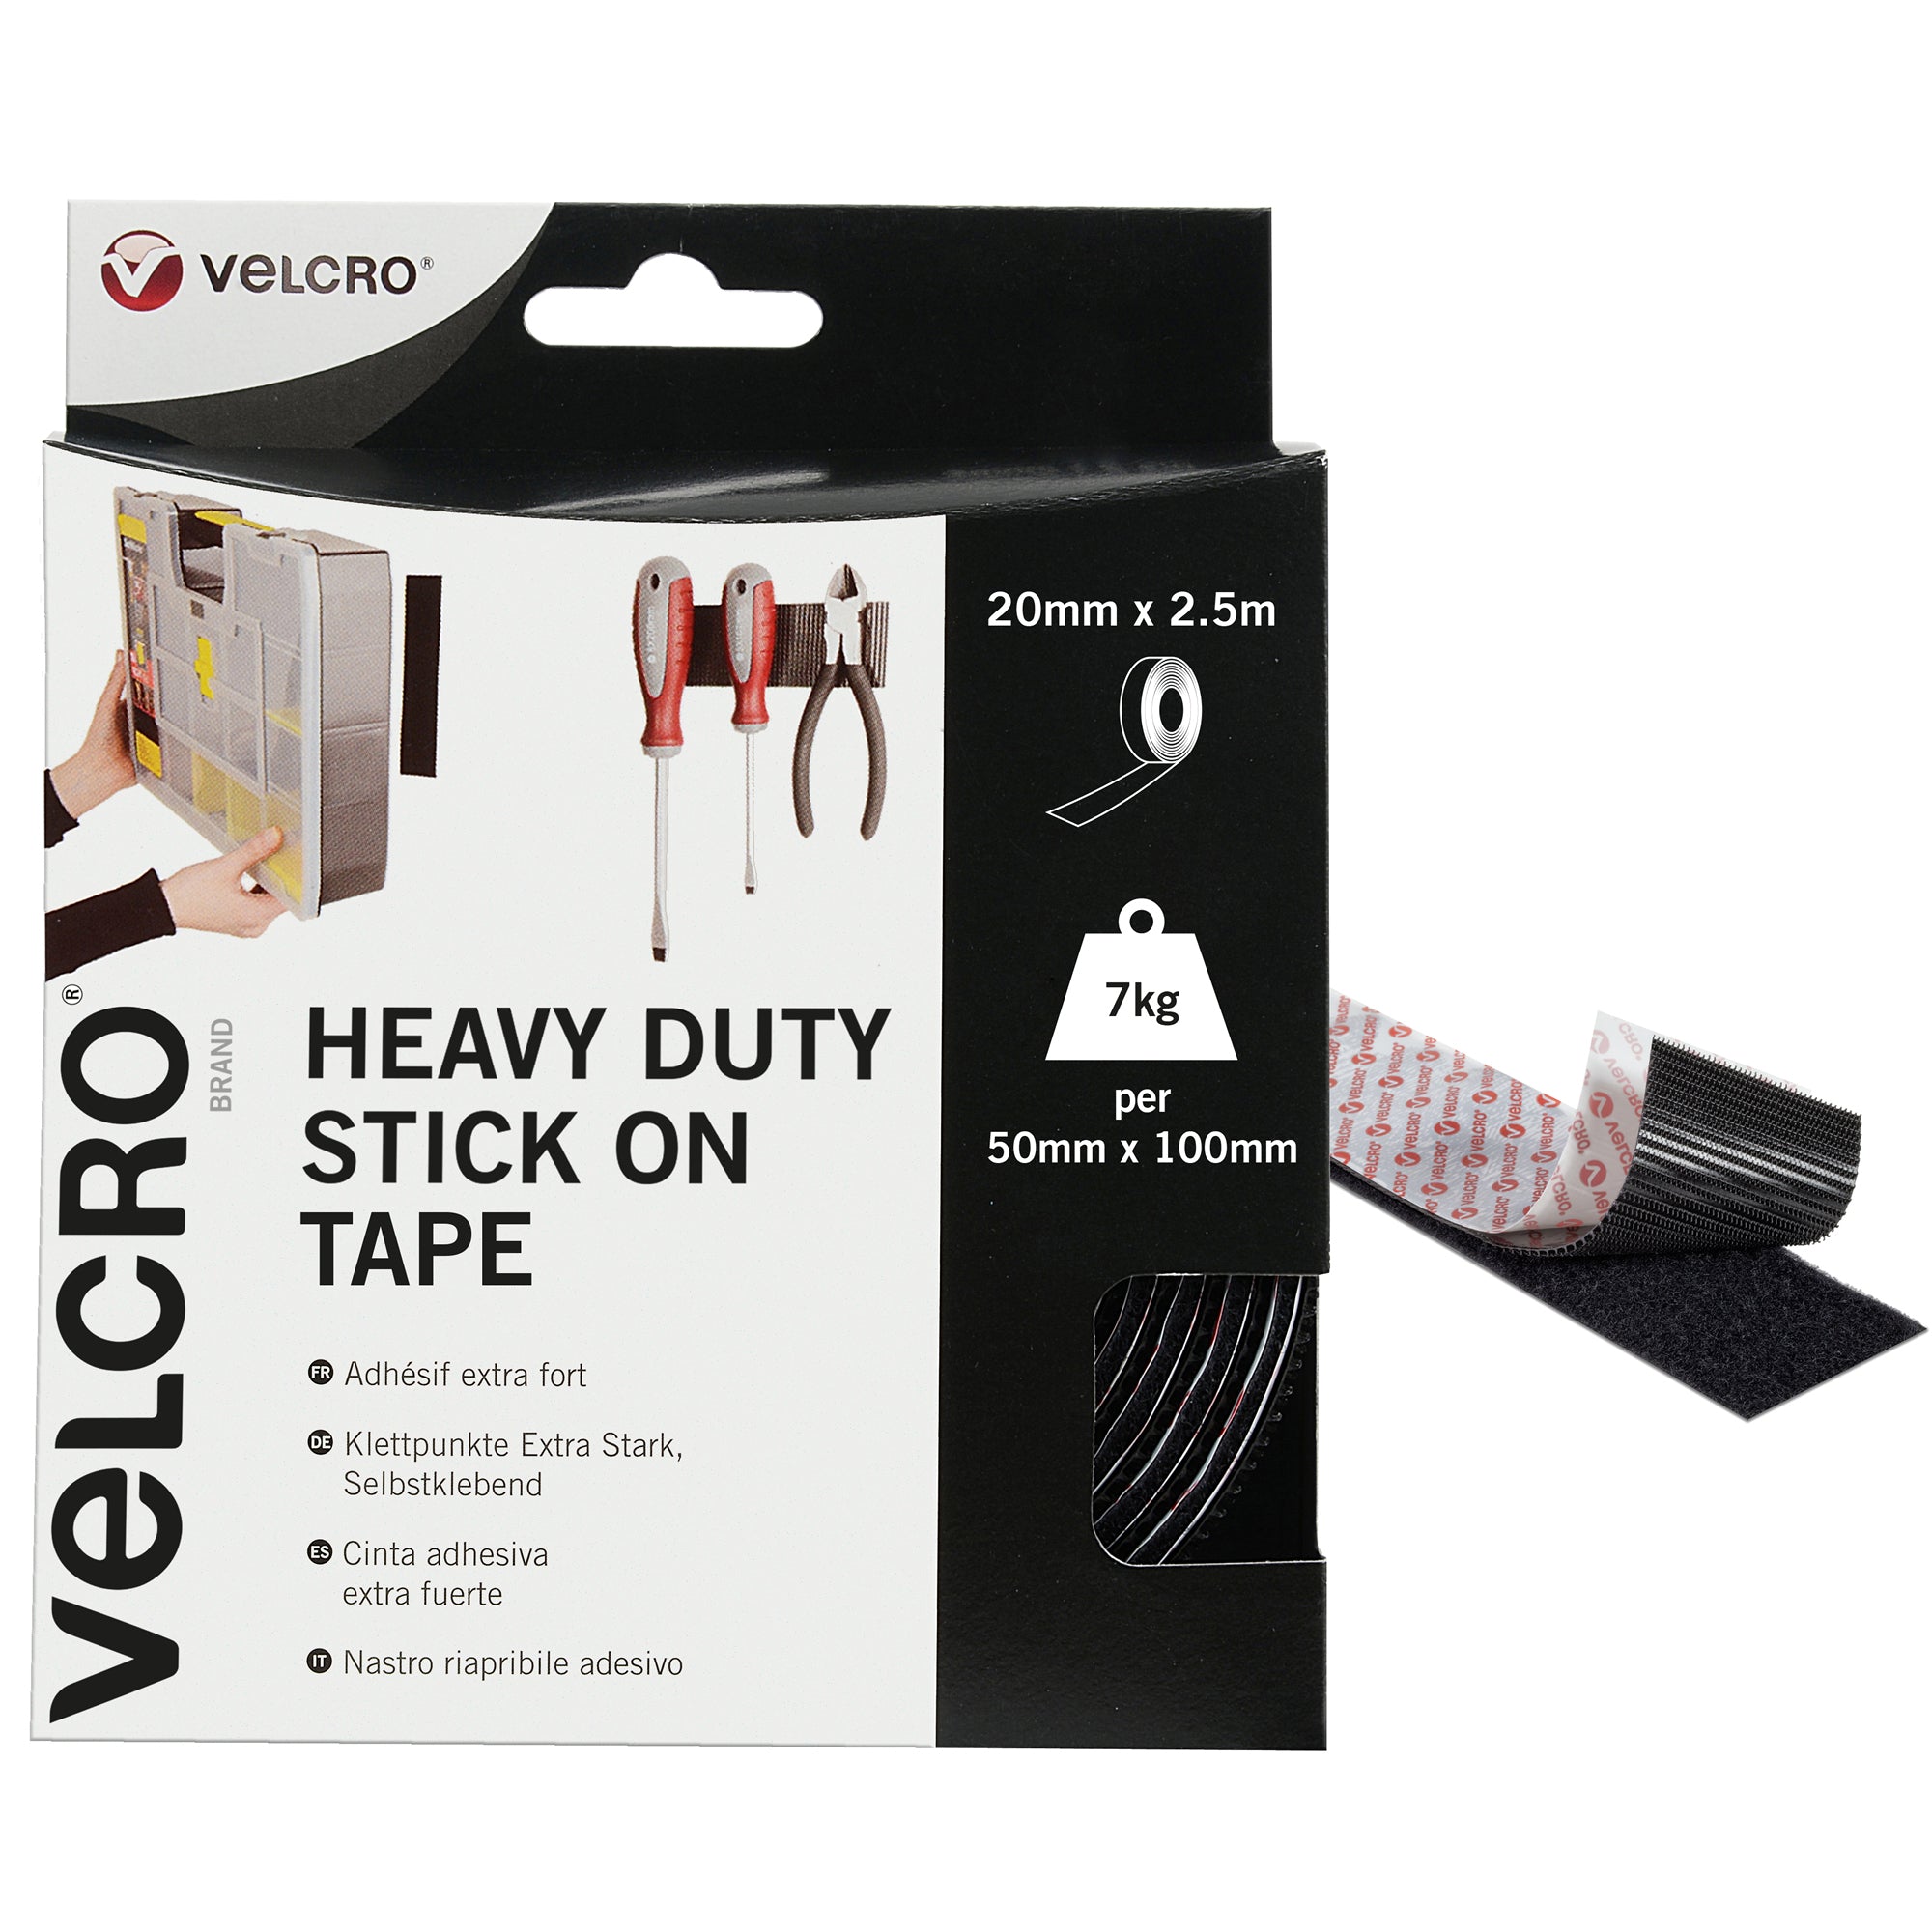 VELCRO Brand Heavy Duty Stick On Hook And Loop Self Adhesive Tape 20mm Wide